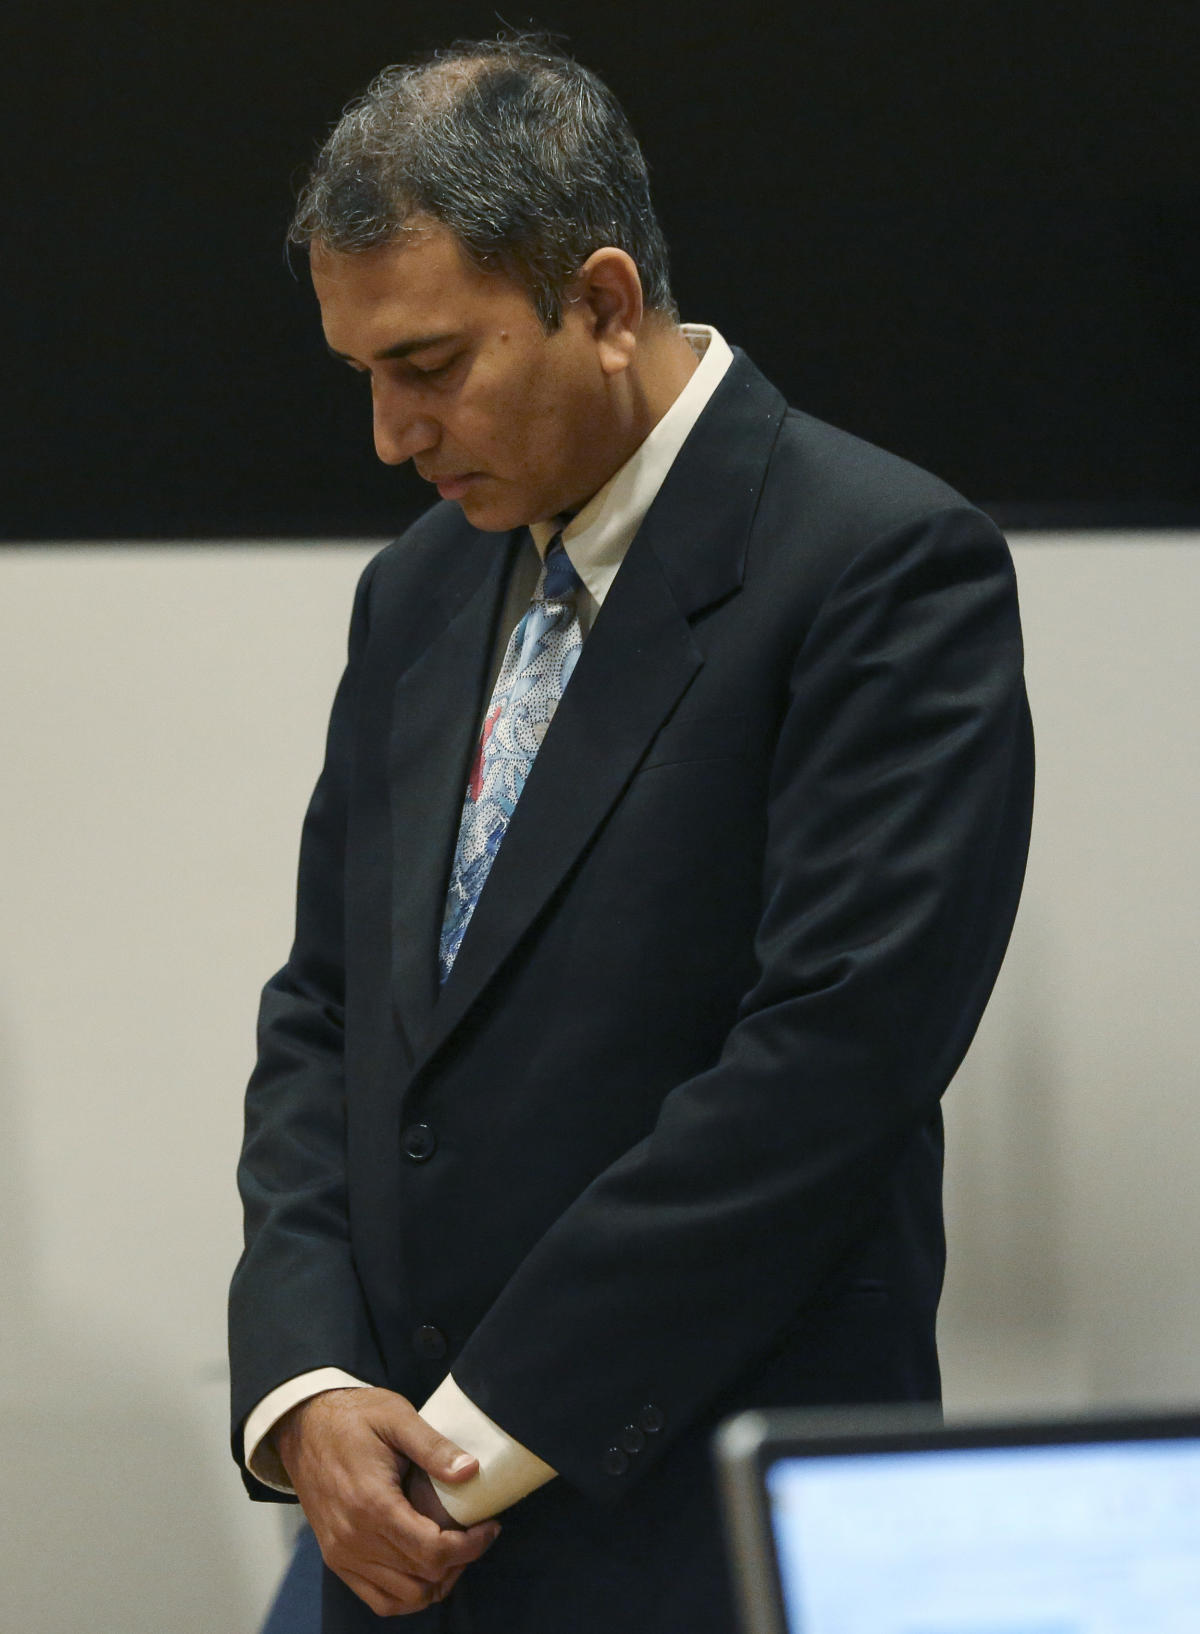 Doctor Convicted Of Sexual Assault Of Patient Gets Probation